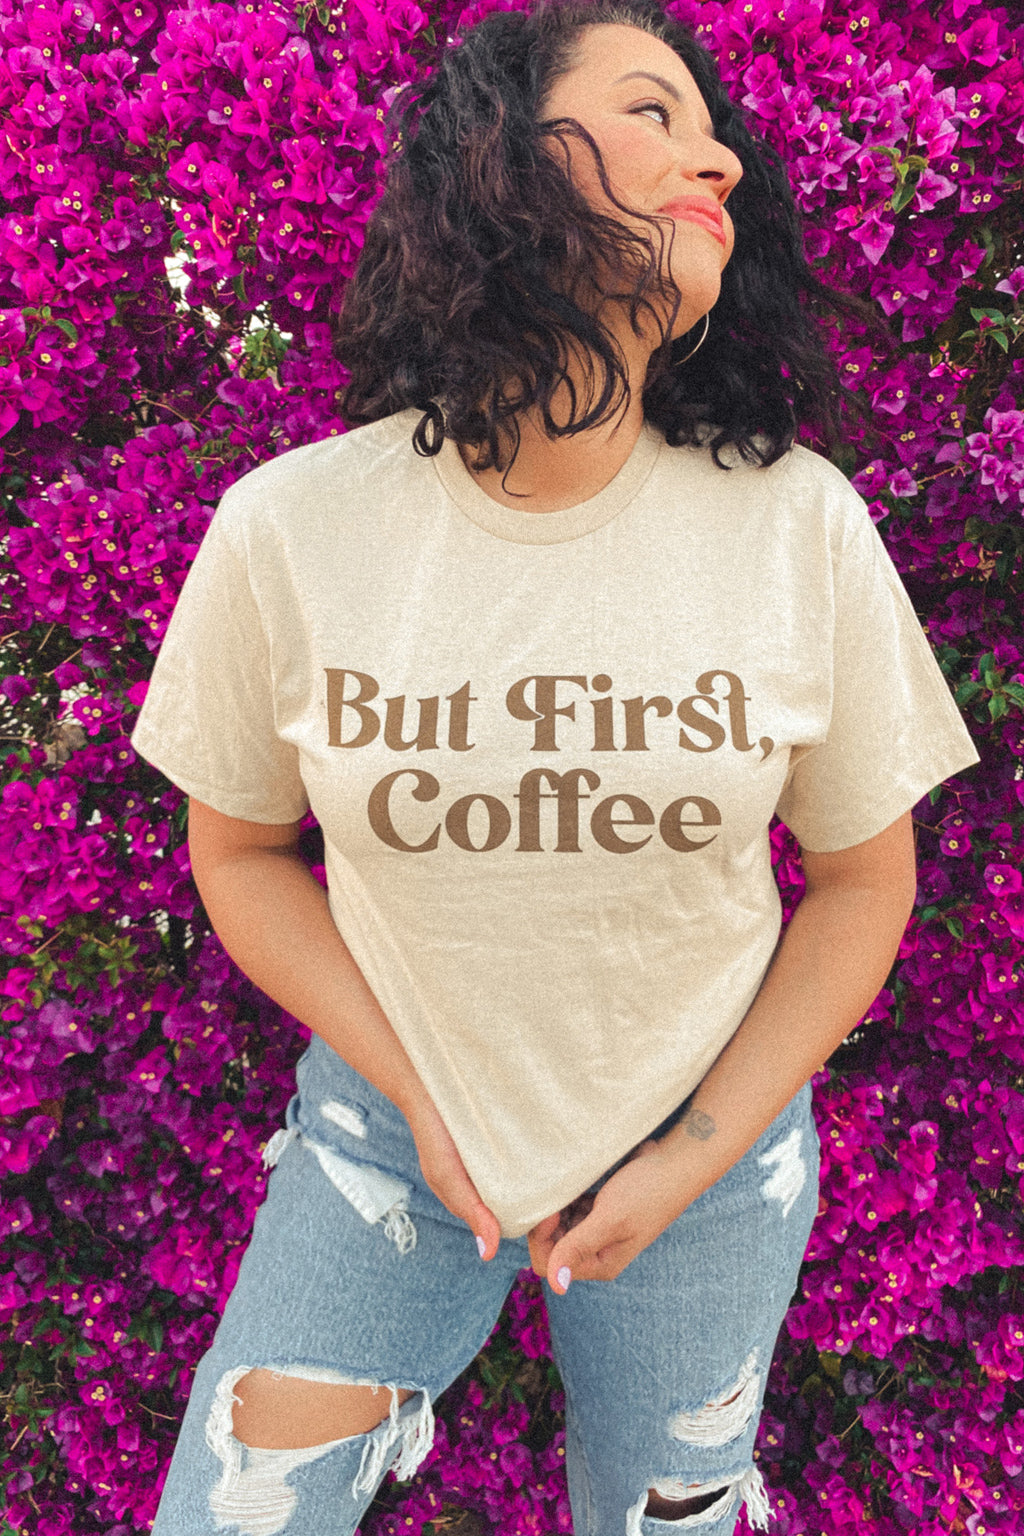 But First, Coffee Tee